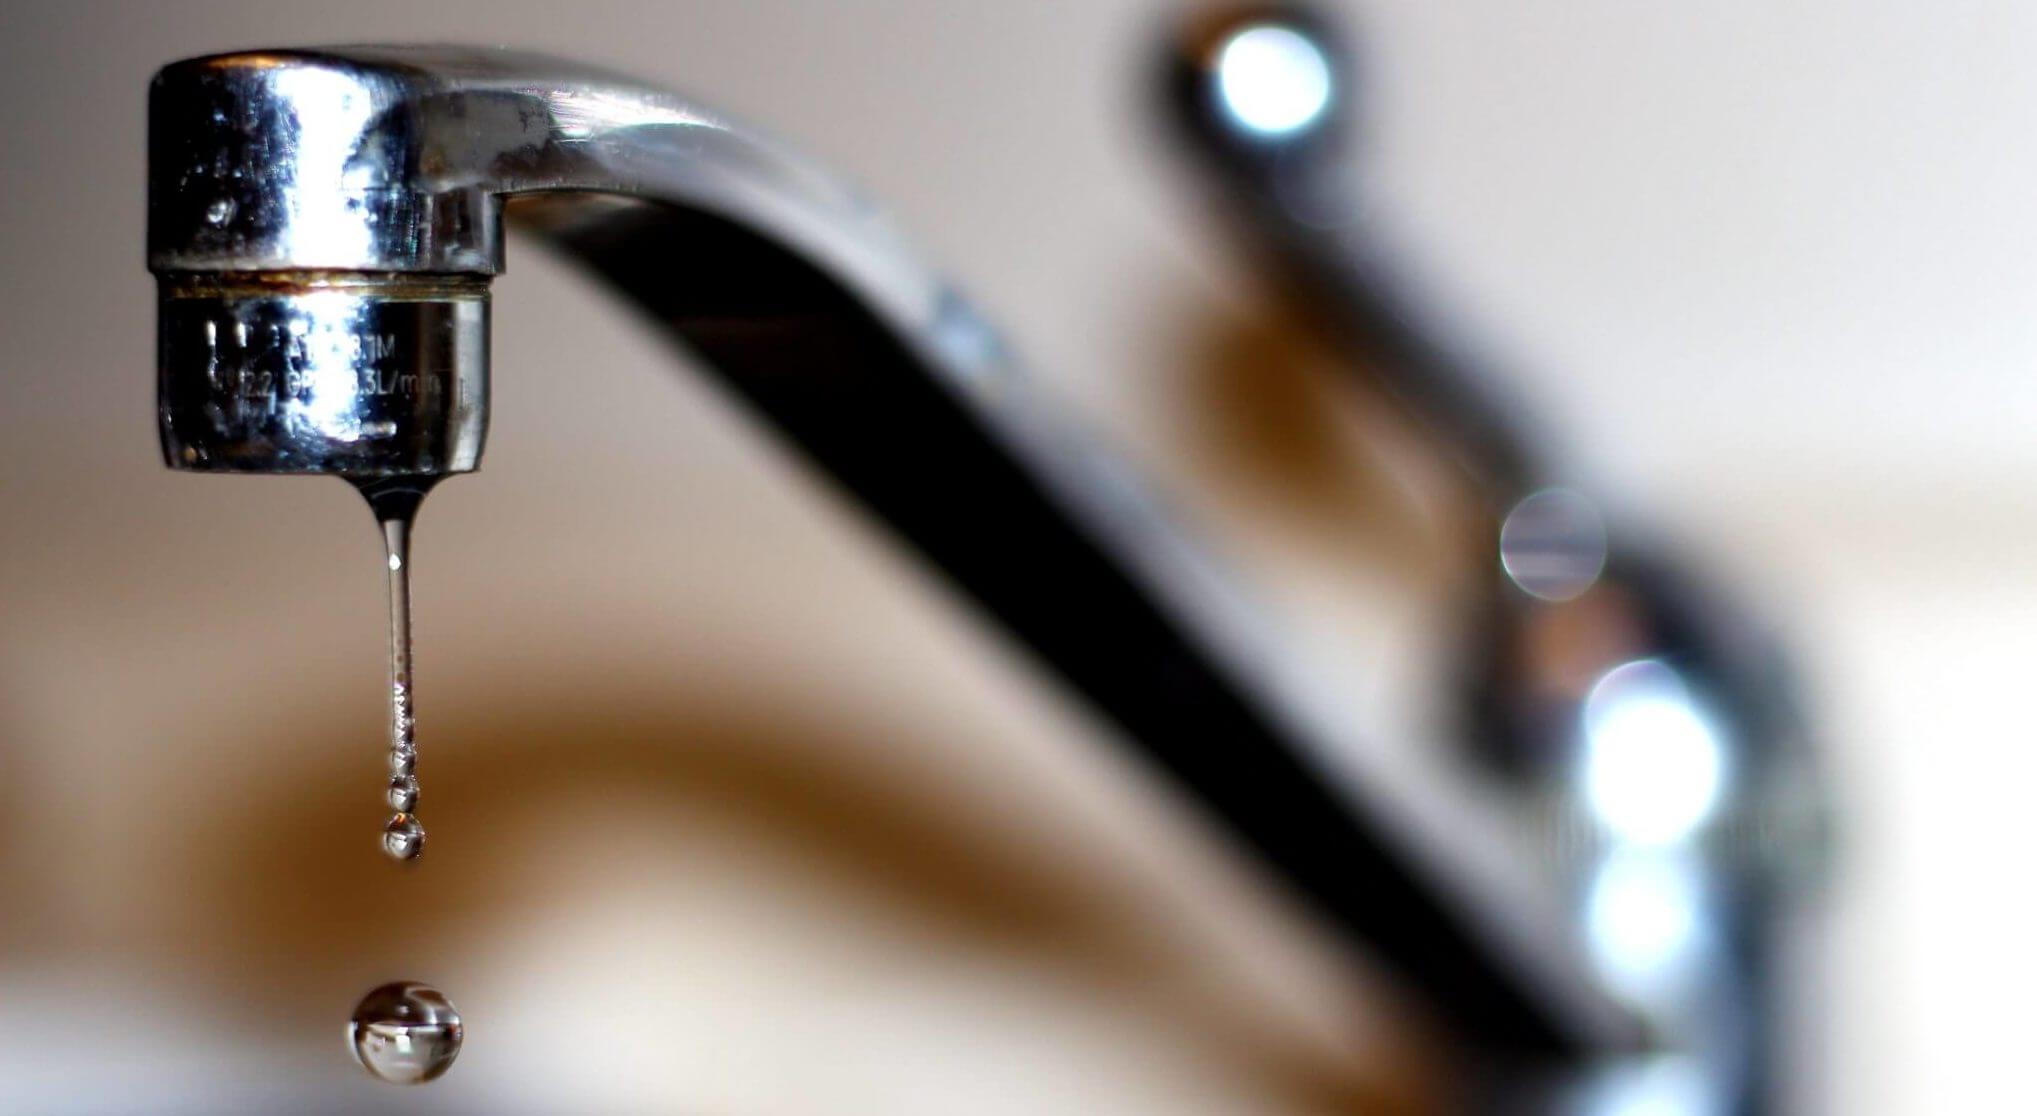 How to fix a Dripping Bathroom Faucet: Plumbing Solutions